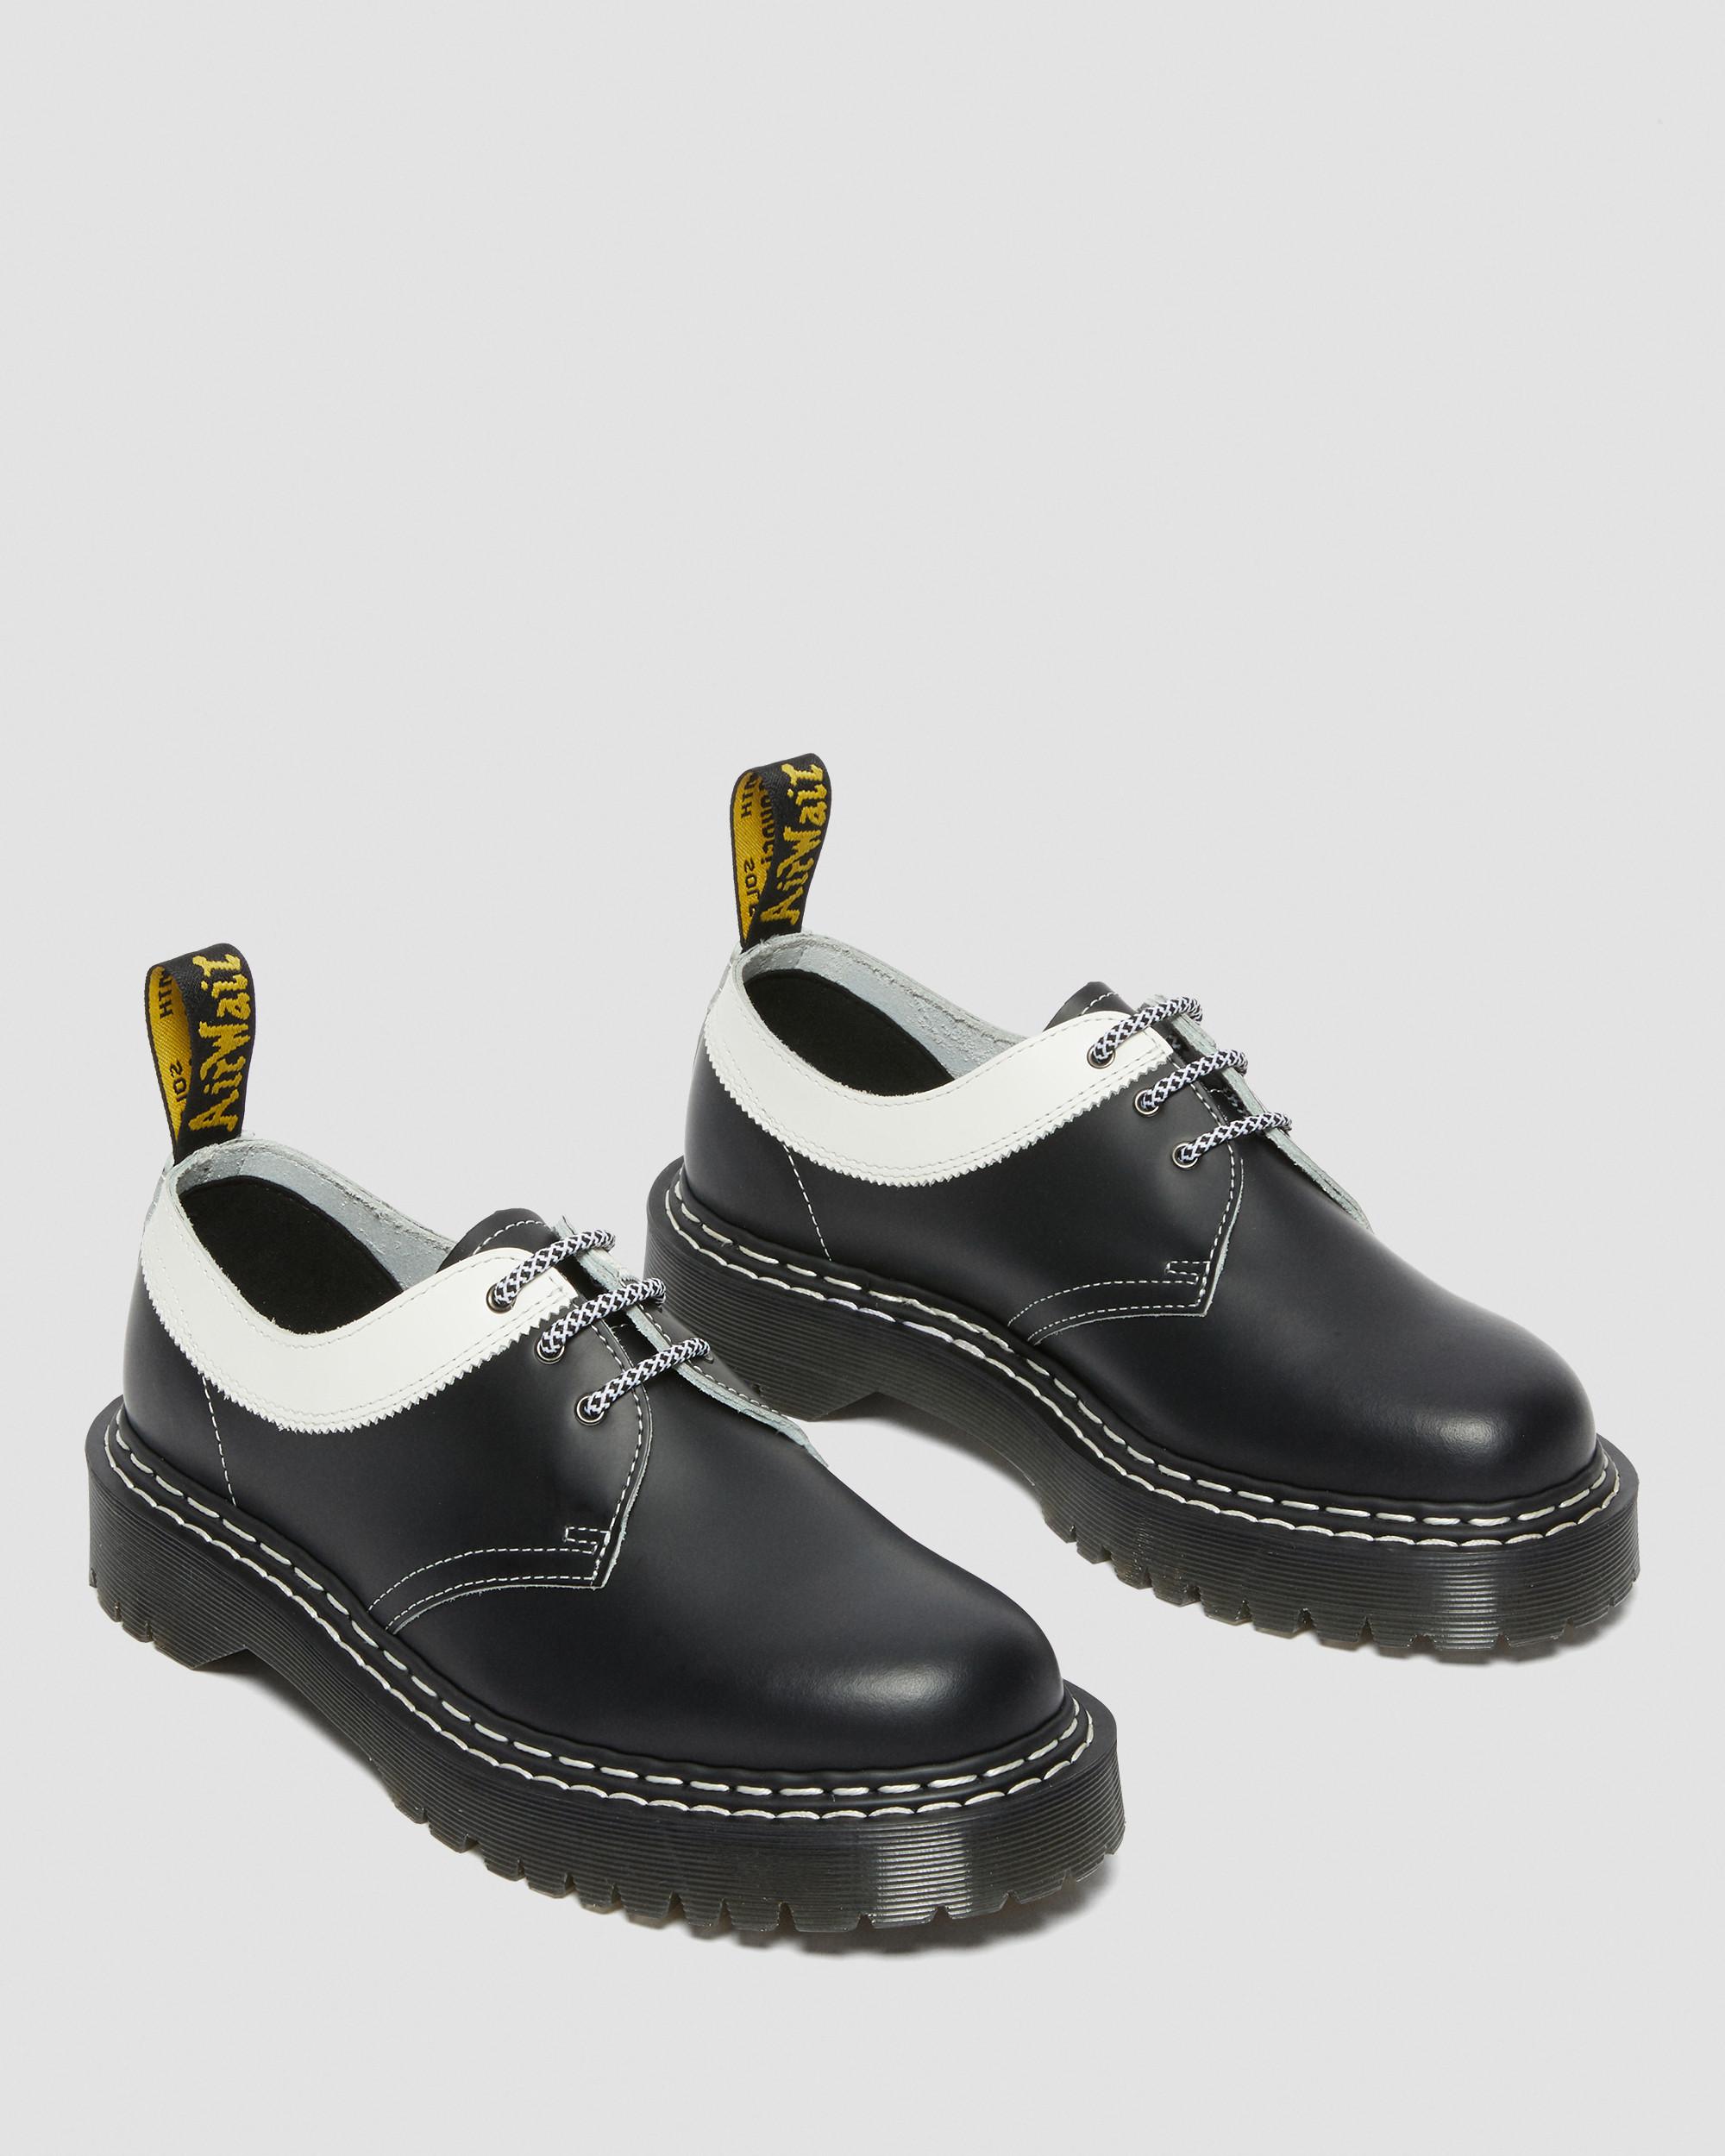 1461 Bex Smooth Contrast Leather Oxford Shoes, Black | Dr. Martens